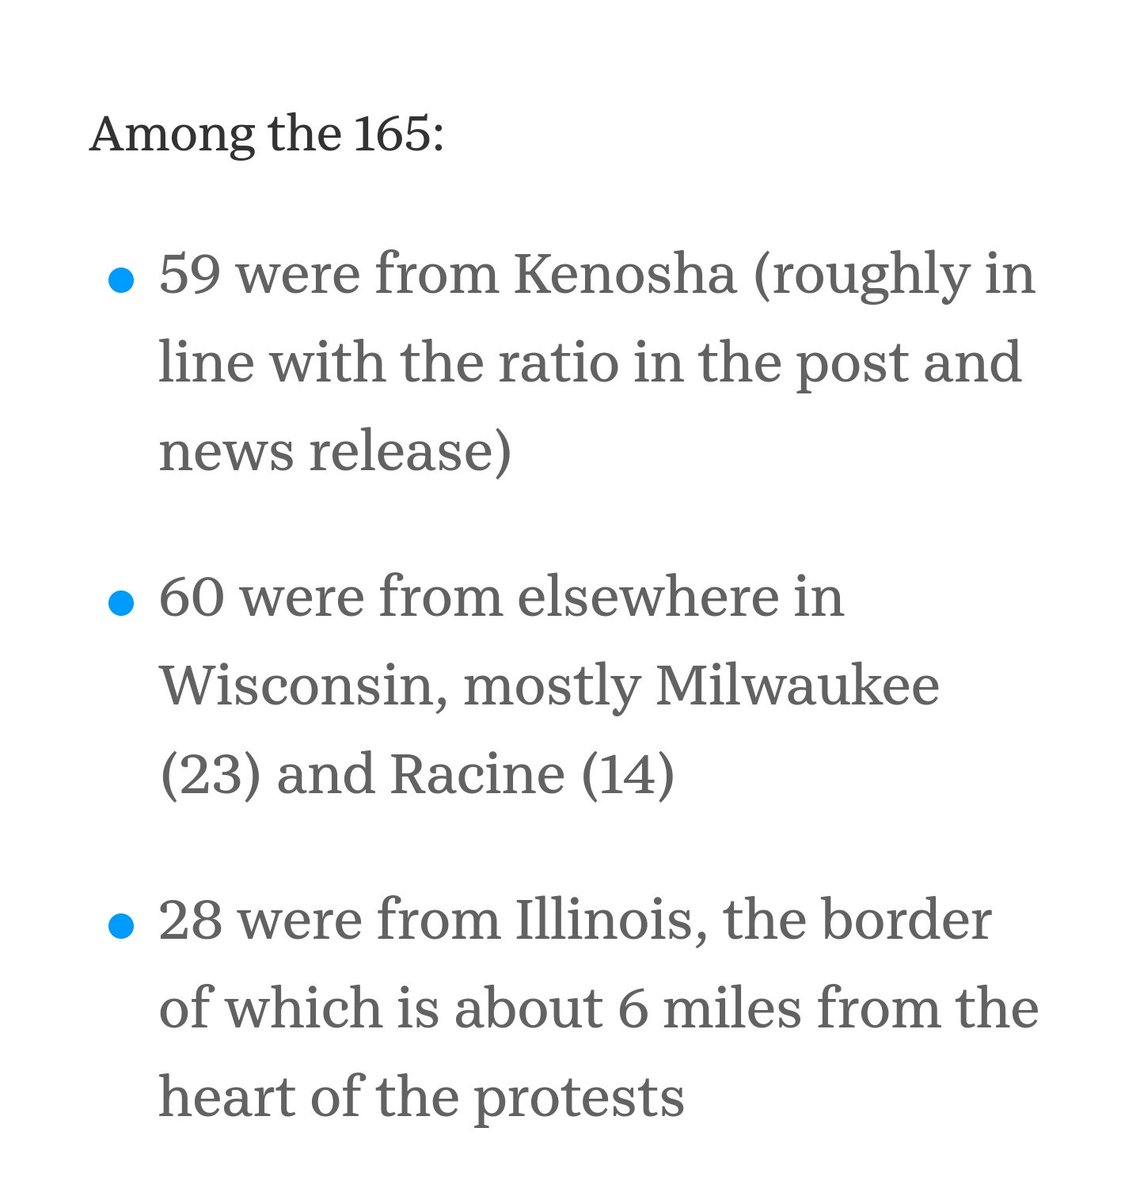 Over 165 people protesting  #jamesblake being shot 7 times in the back by a cop were arrested in Kenosha. In only a day or two of protests